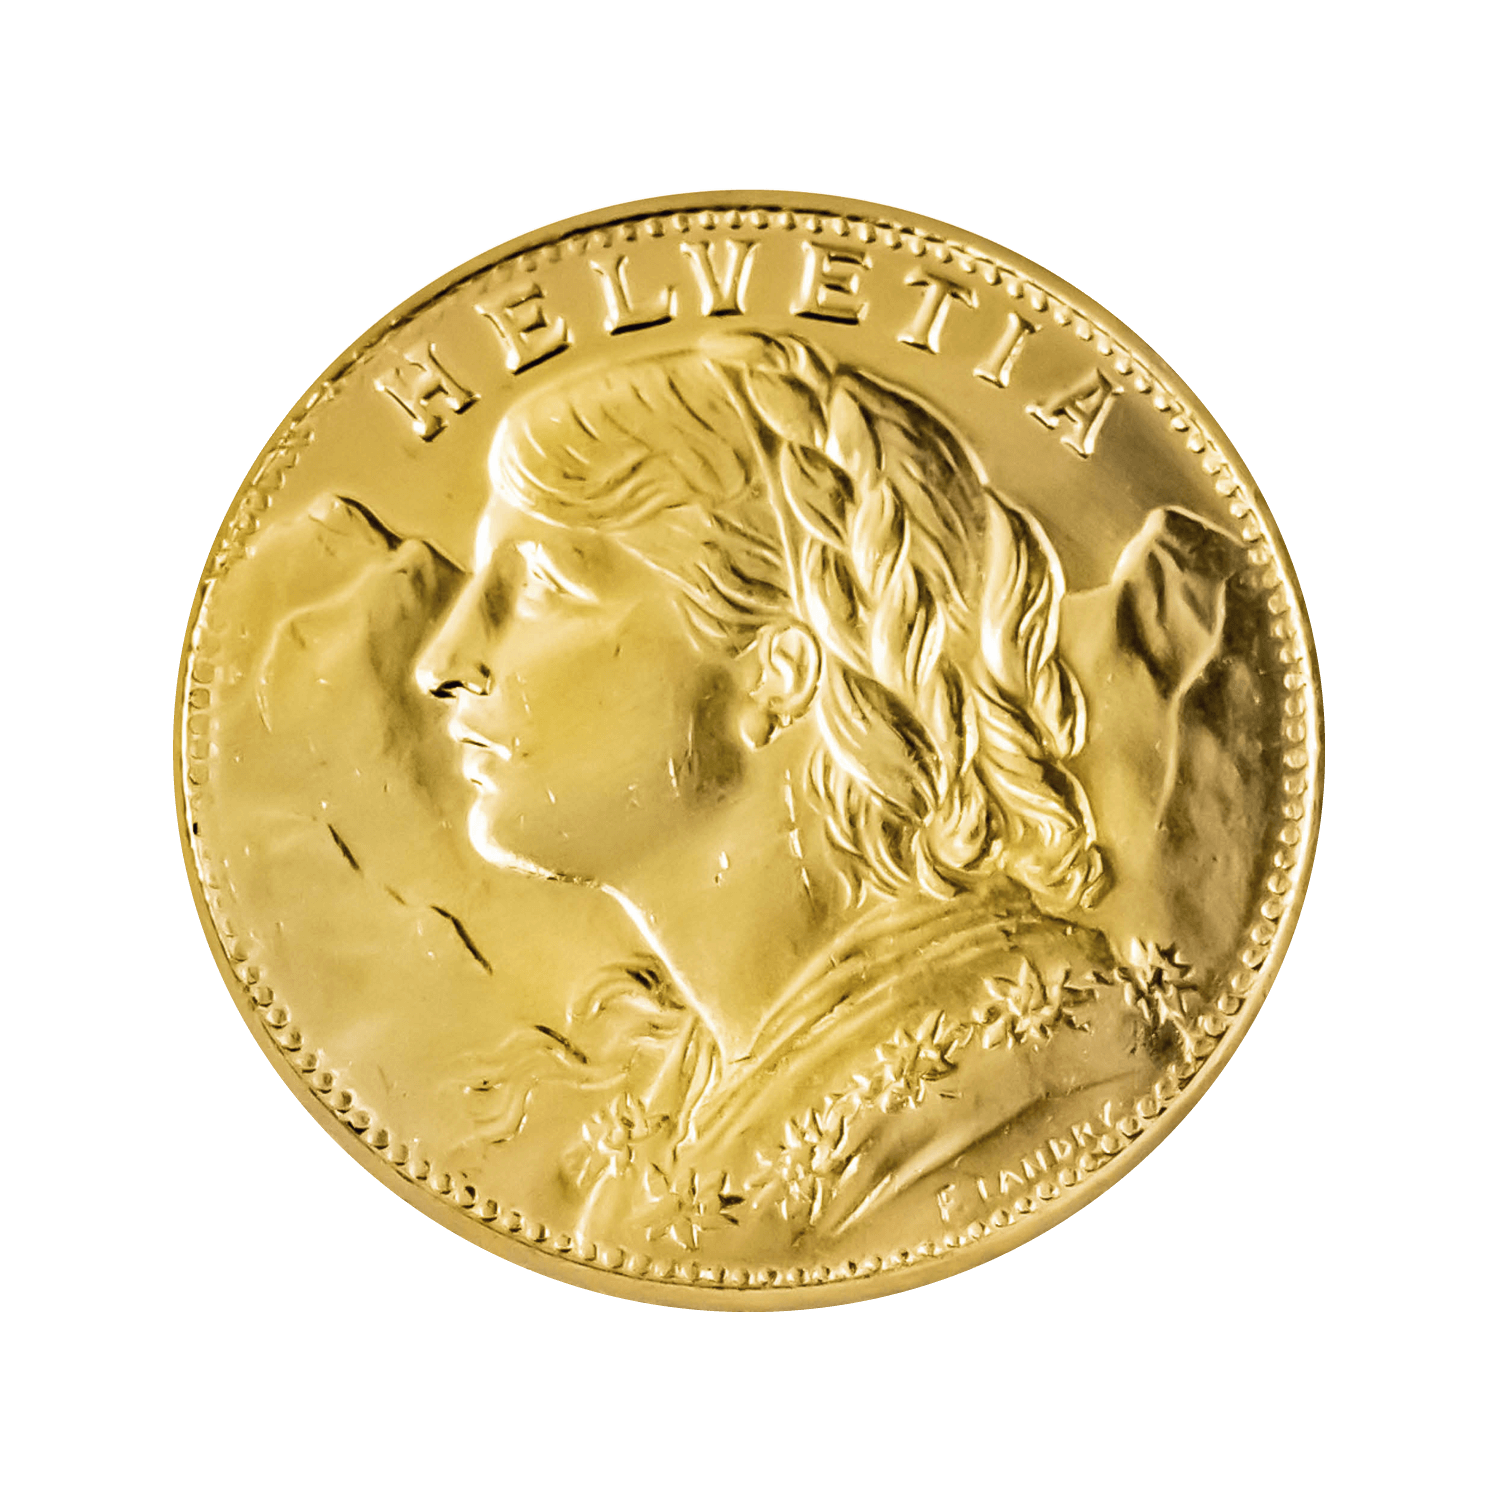 Swiss 20 Franc Gold Bullion Coins | Chards - From £